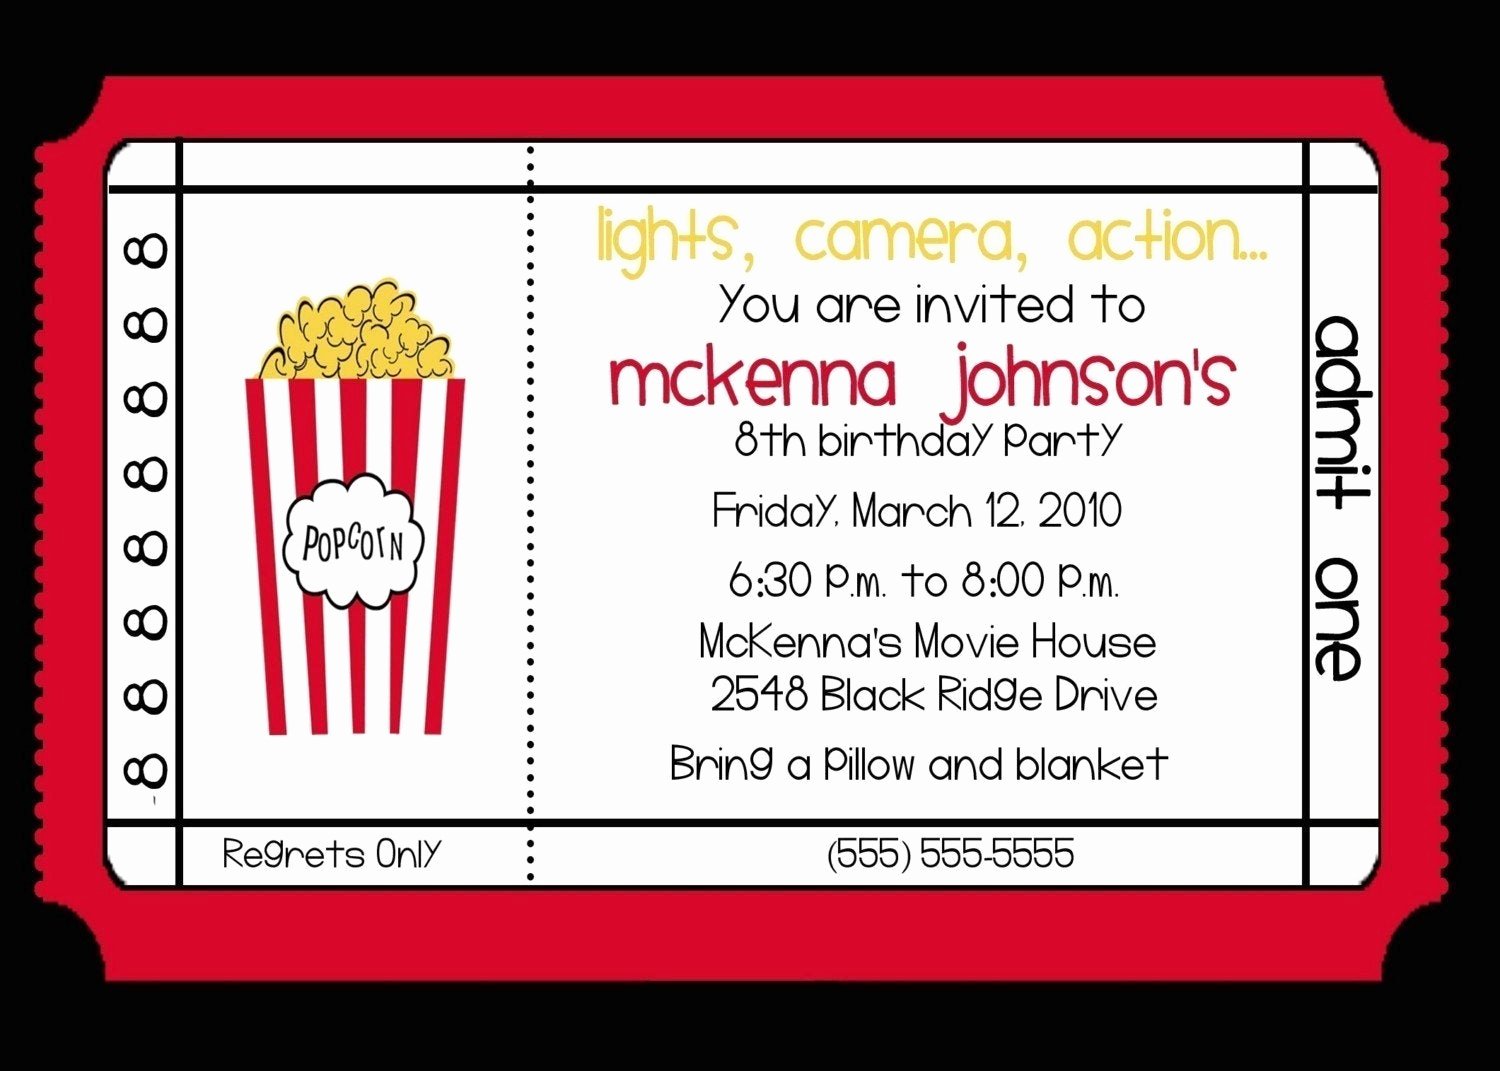 Movie Ticket Invitation Template New Movie theater Birthday Party Invitation by Nattysuedesigns1